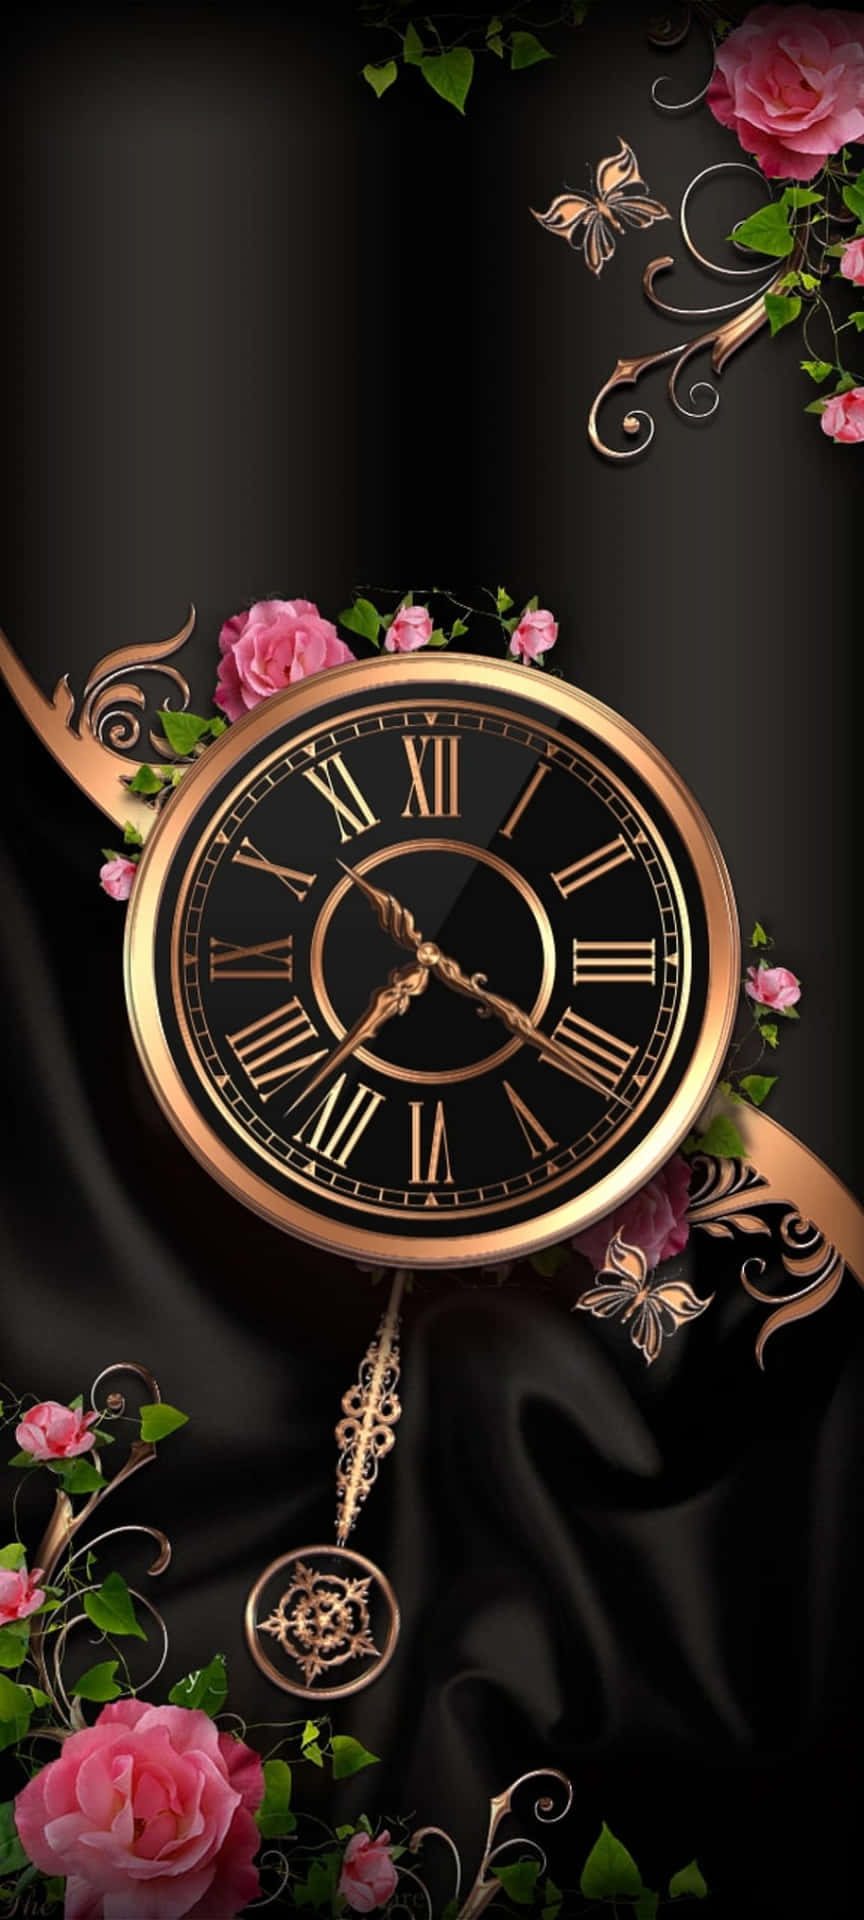 A Clock With Roses And Butterflies On A Black Background